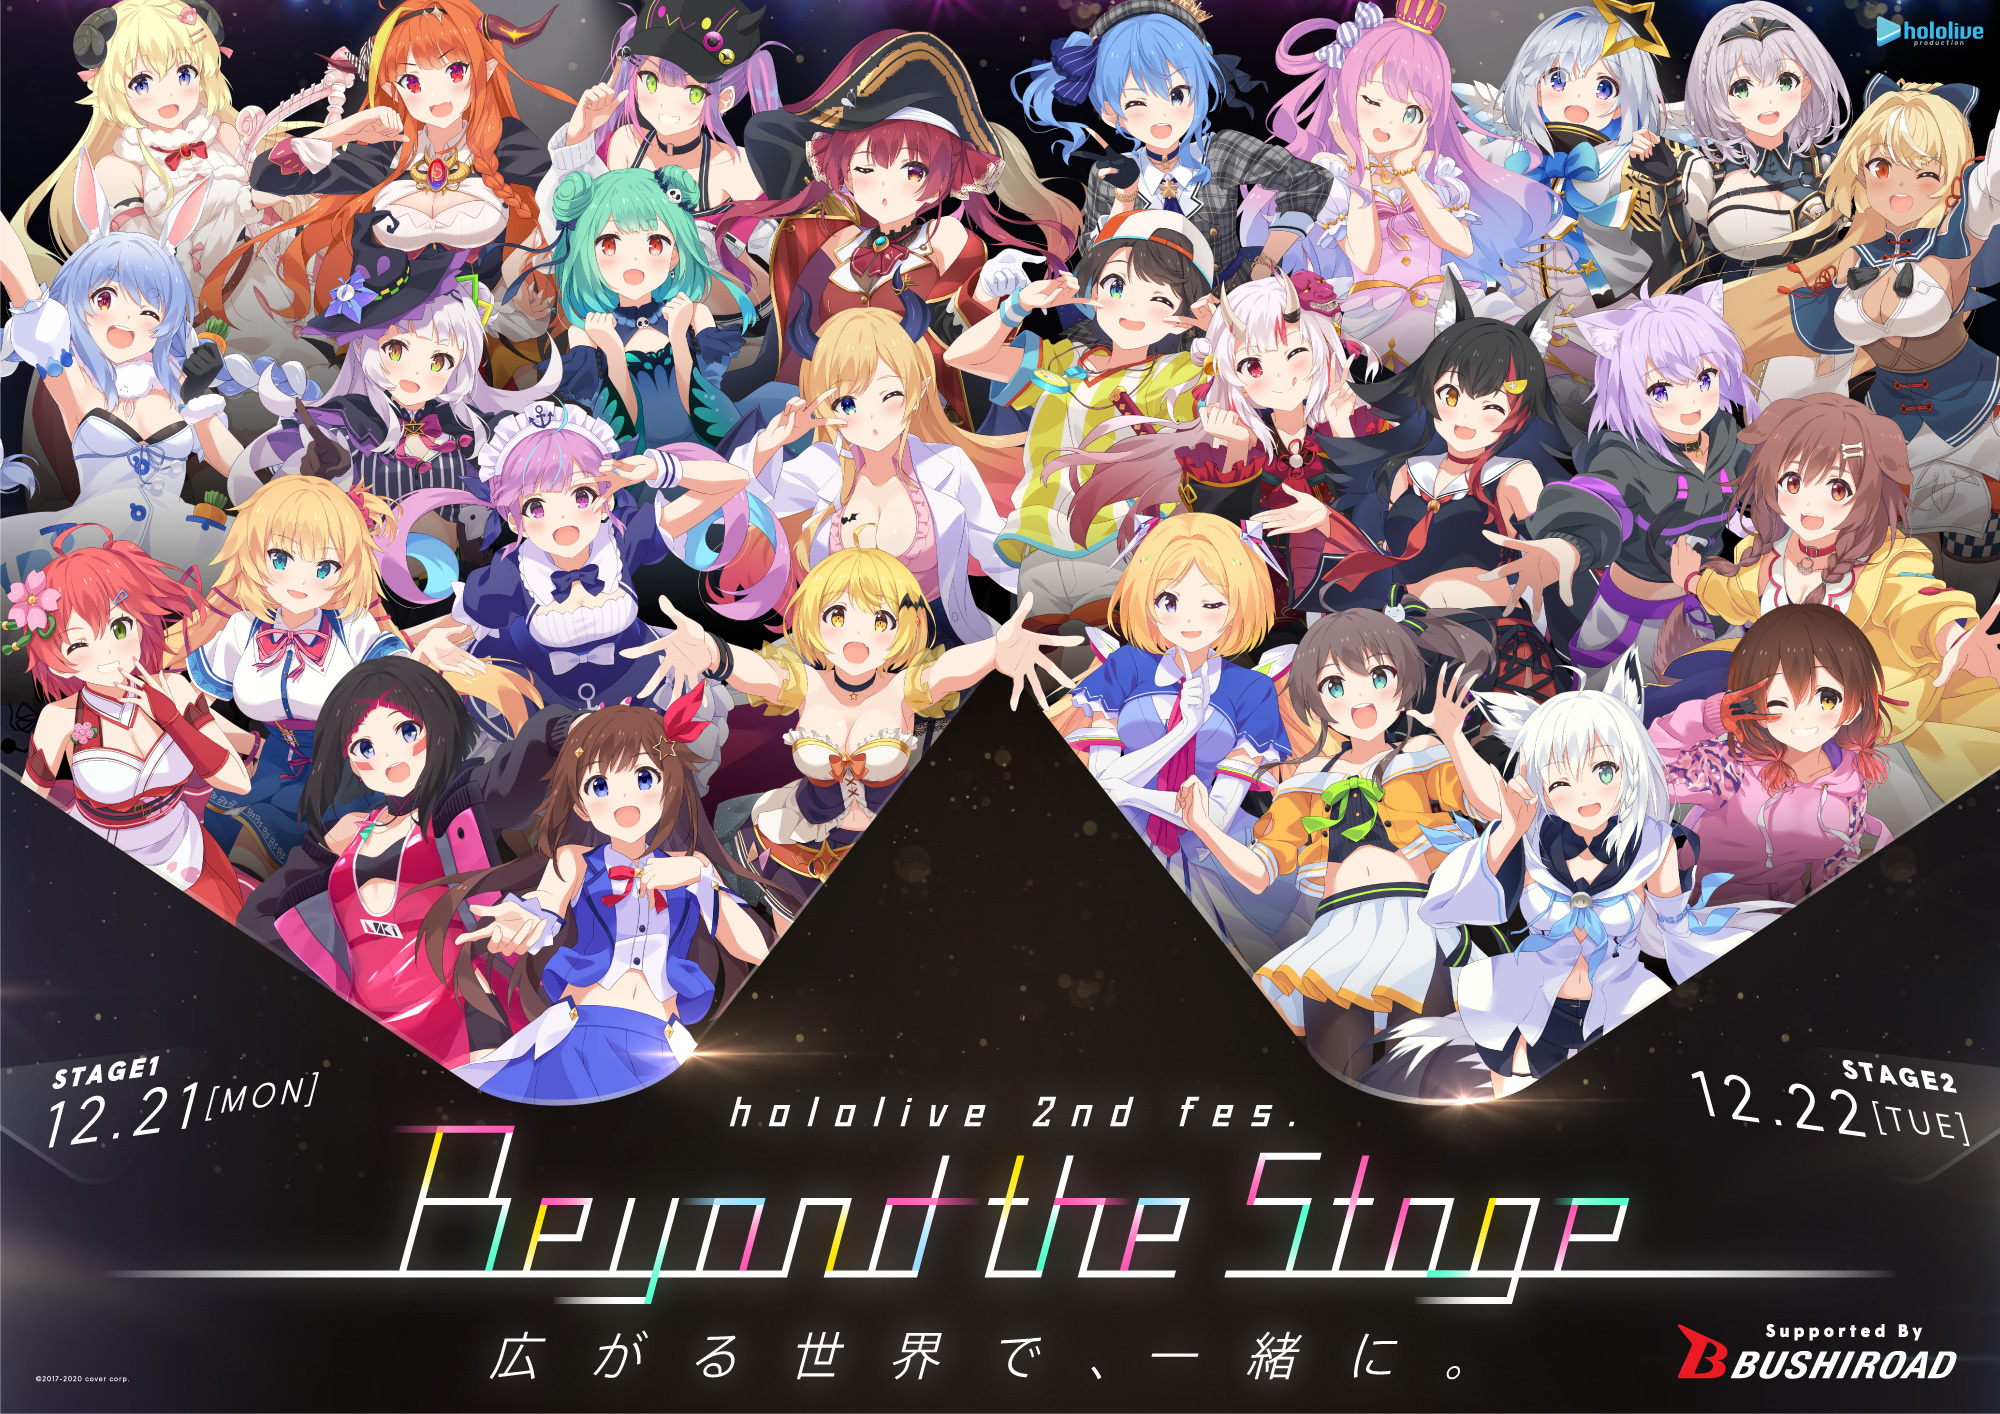 Vtuber事務所 ホロライブ 全体ライブ Hololive 2nd Fes Beyond The Stage Supported By Bushiroad 開催決定 カバー株式会社のプレスリリース